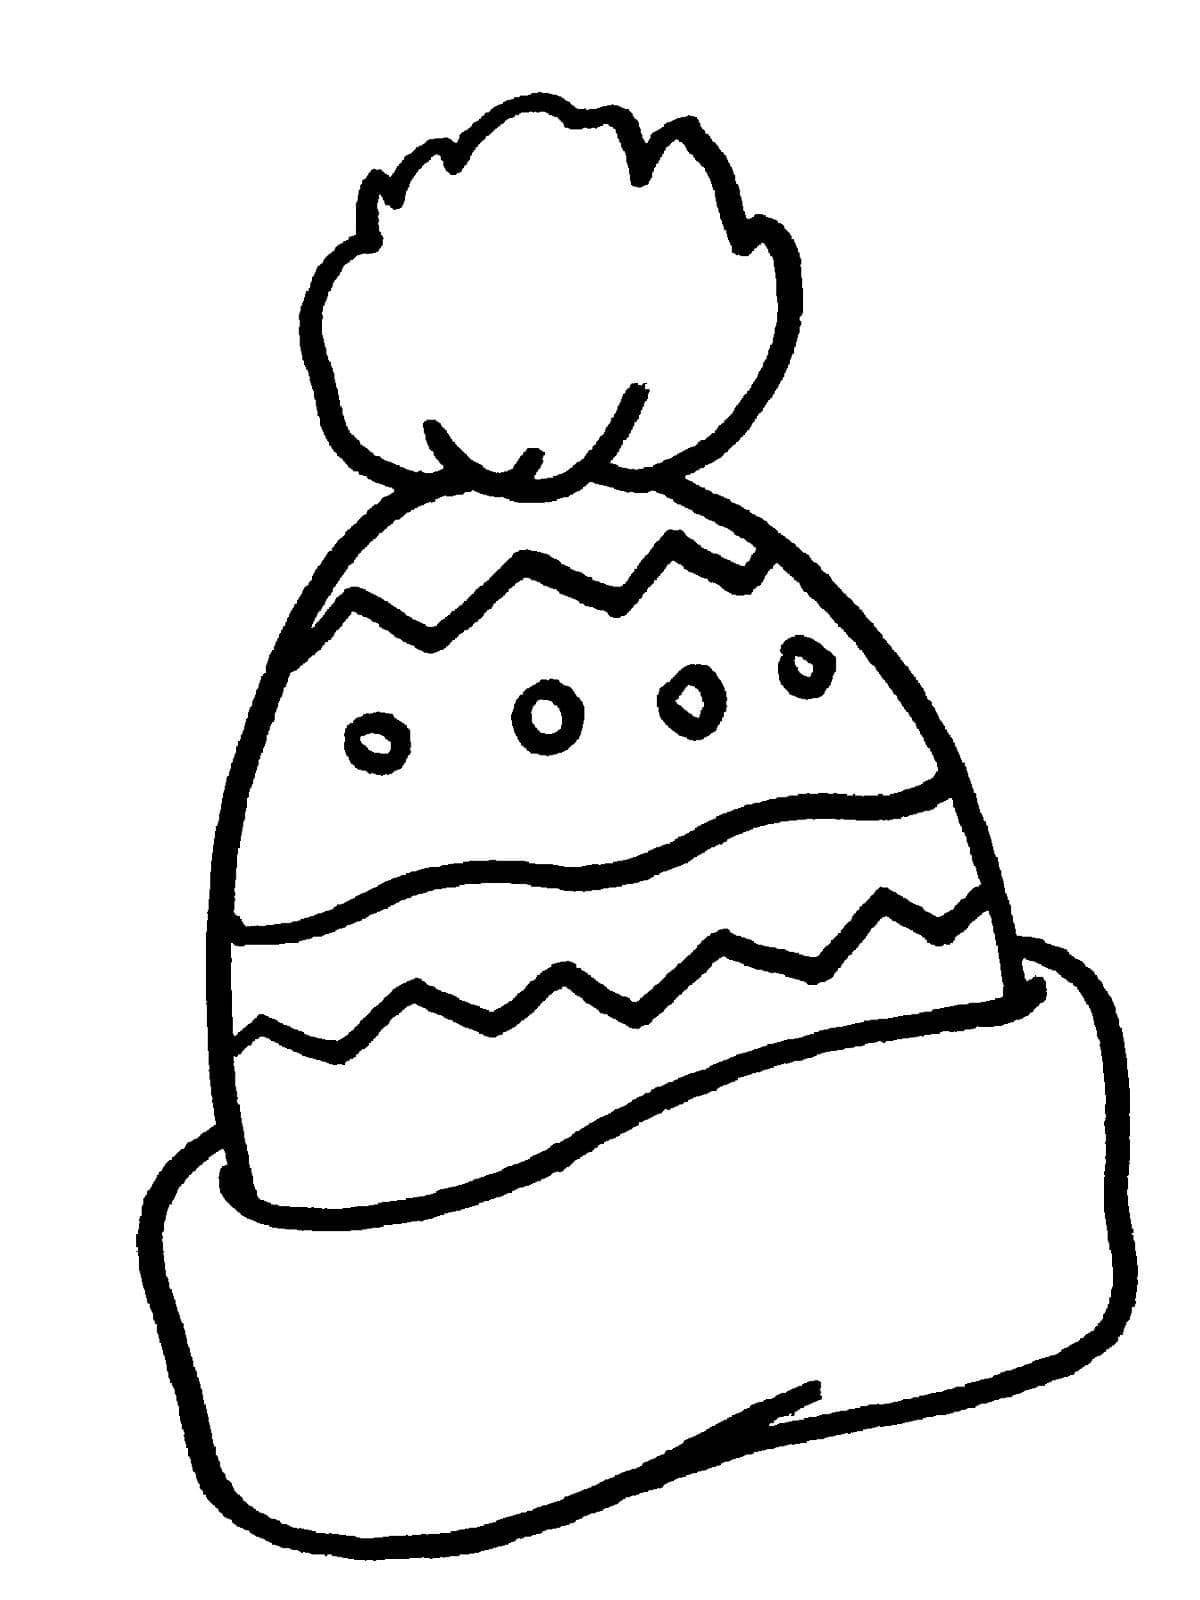 Coloring page majestic hat and scarf